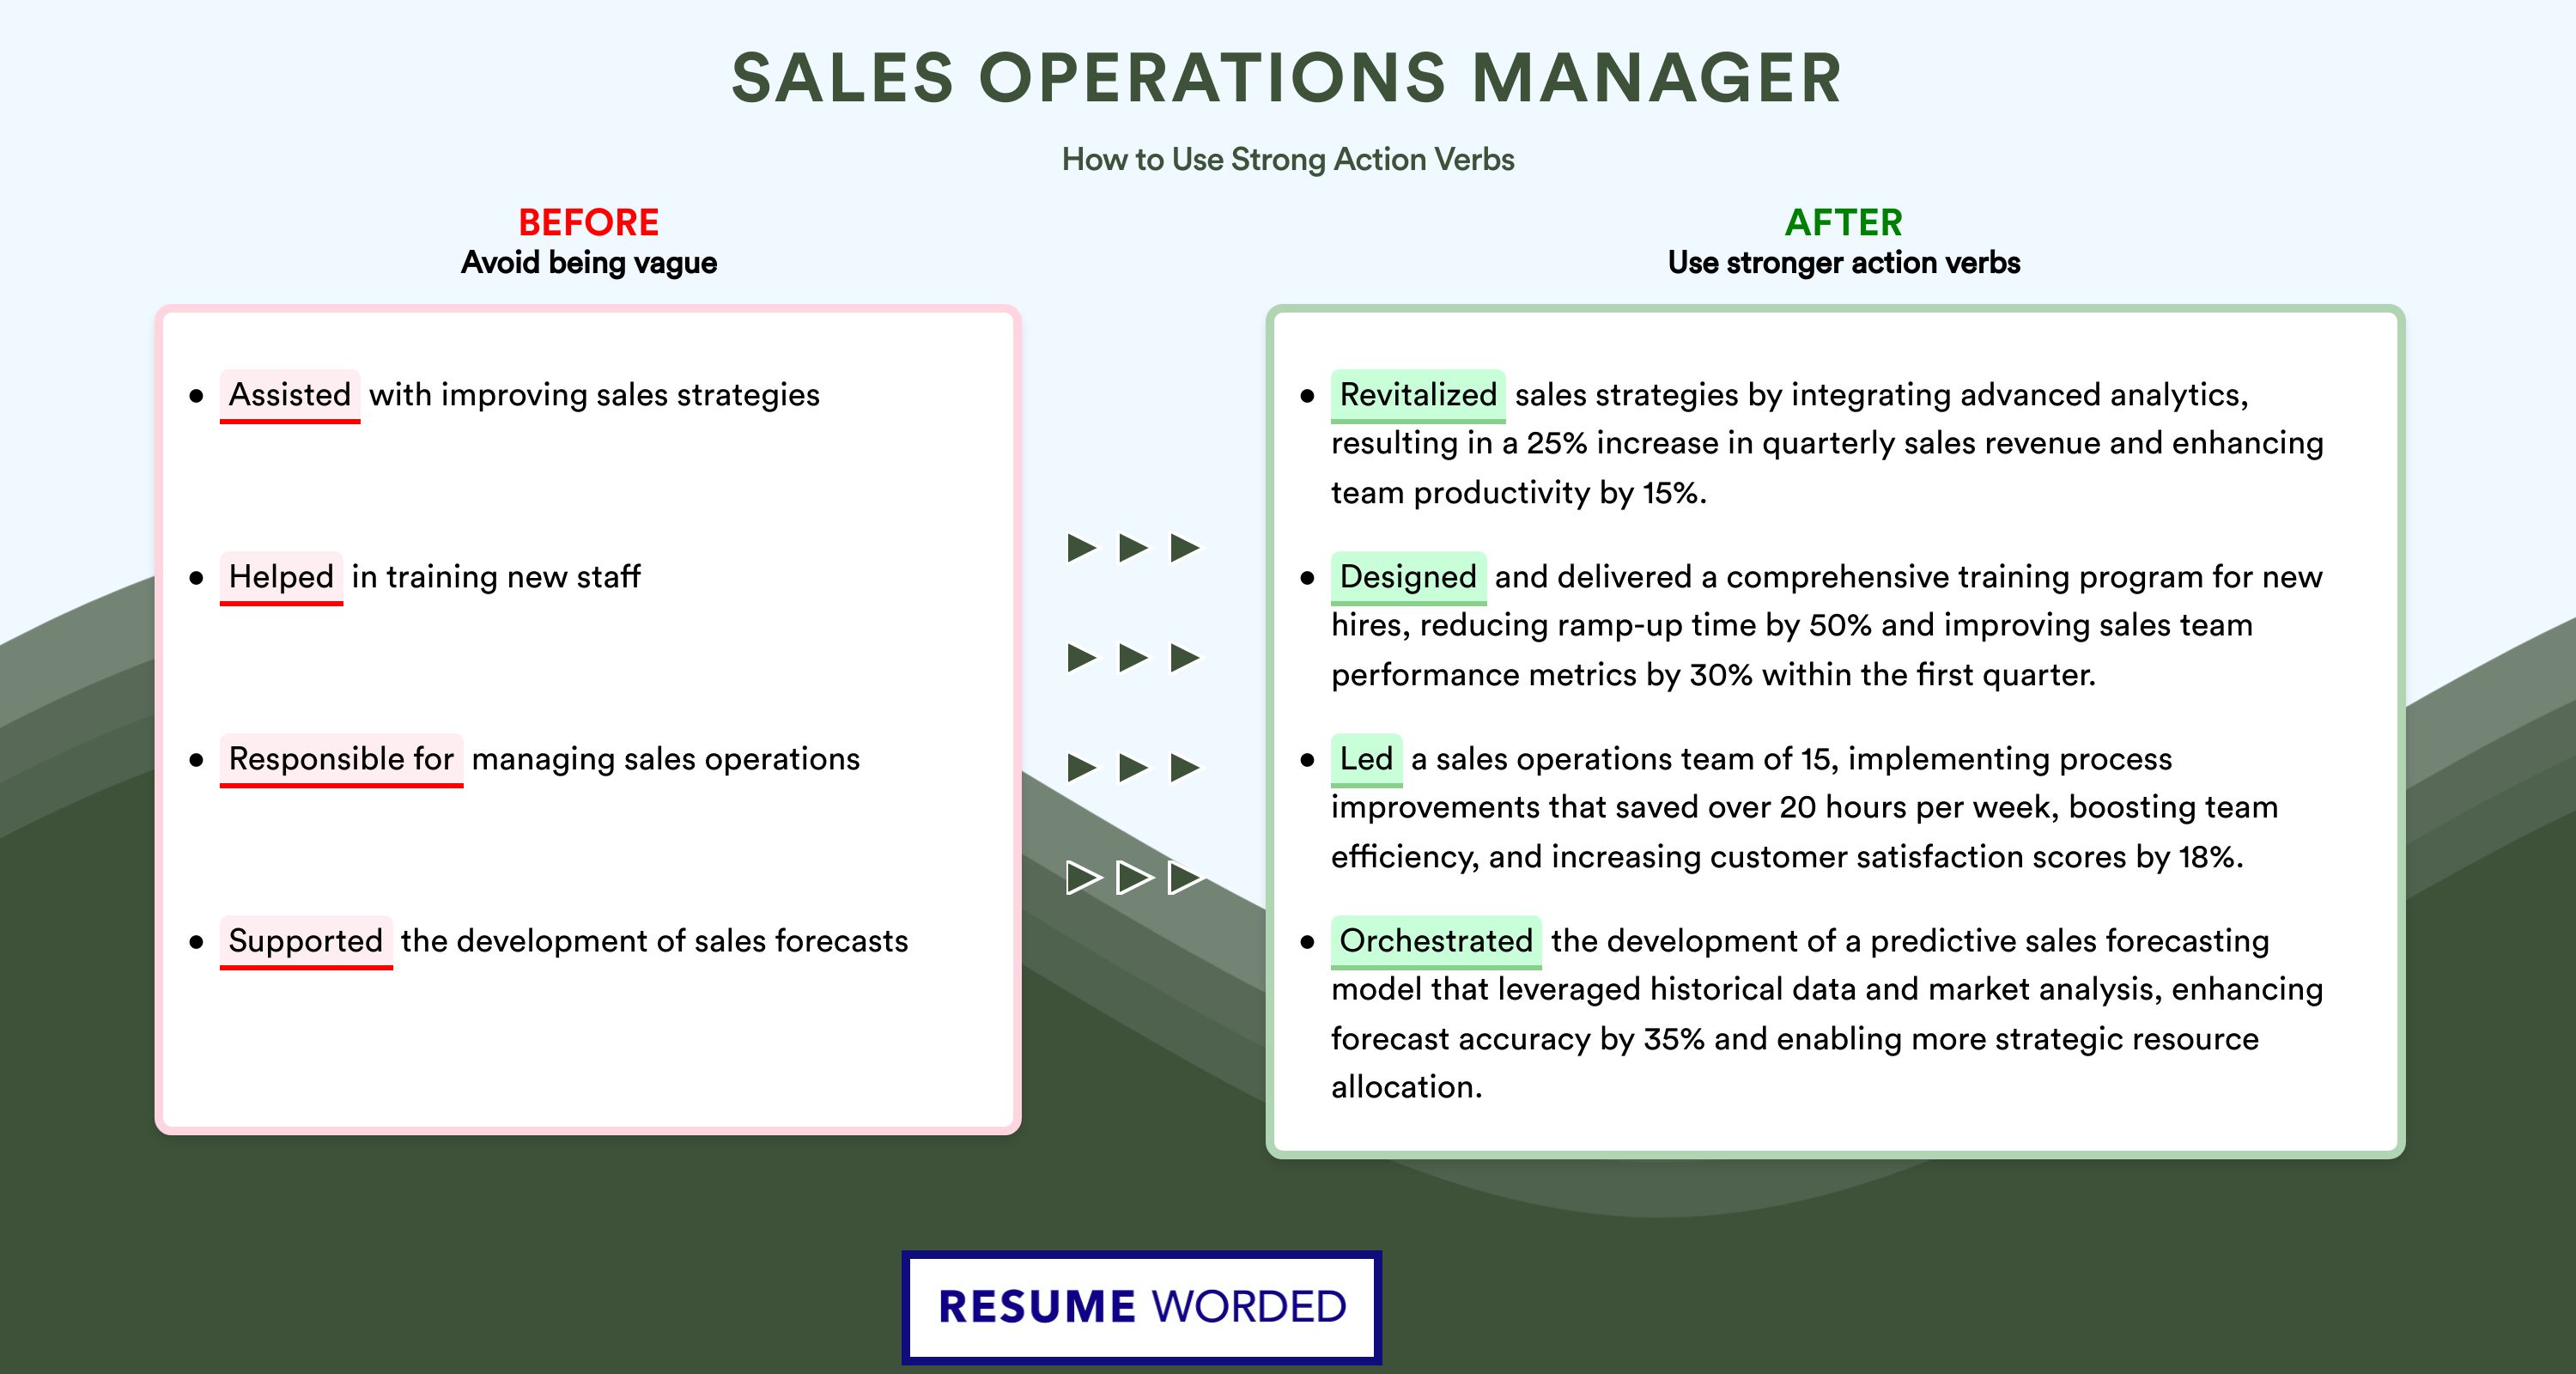 Action Verbs for Sales Operations Manager